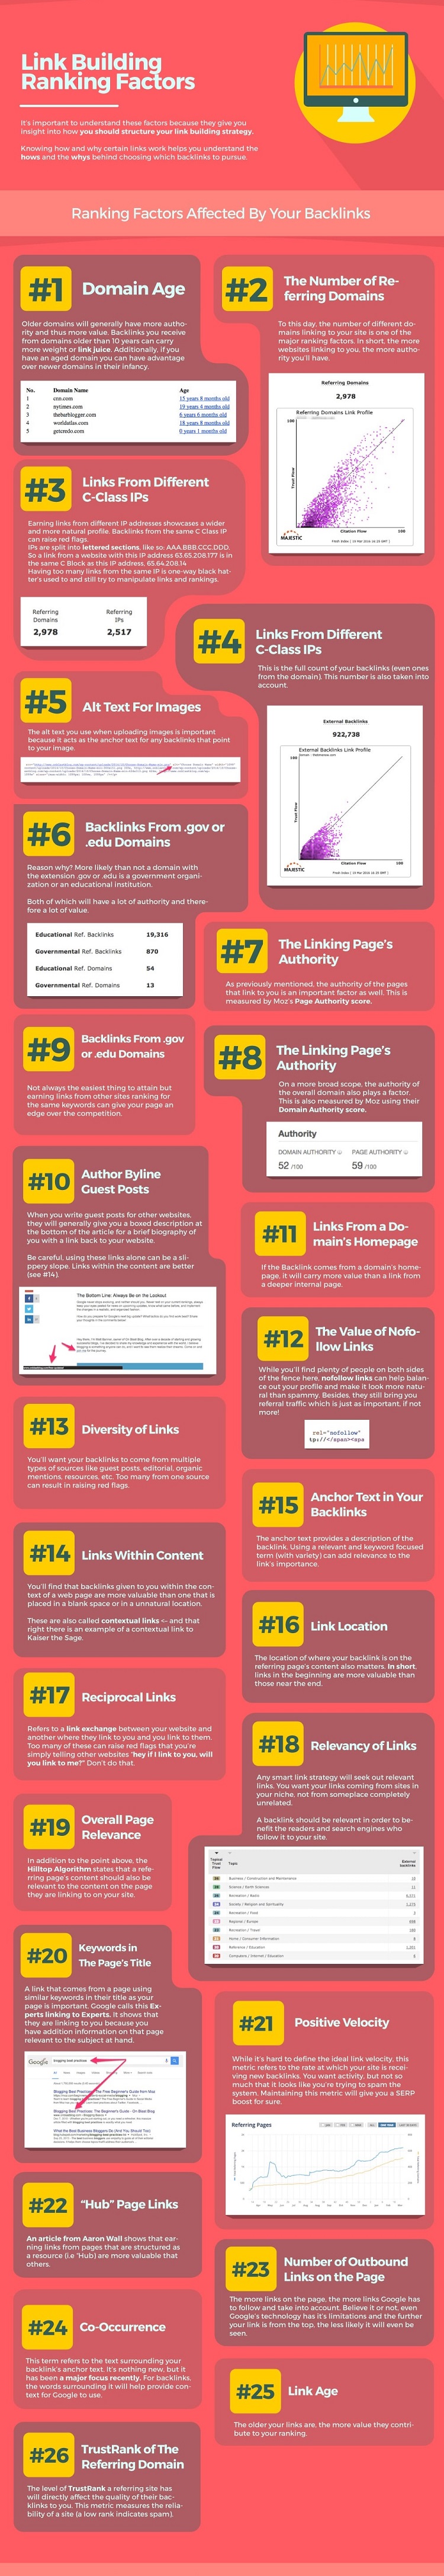 Link Building Ranking Factors for Germany - Infographic